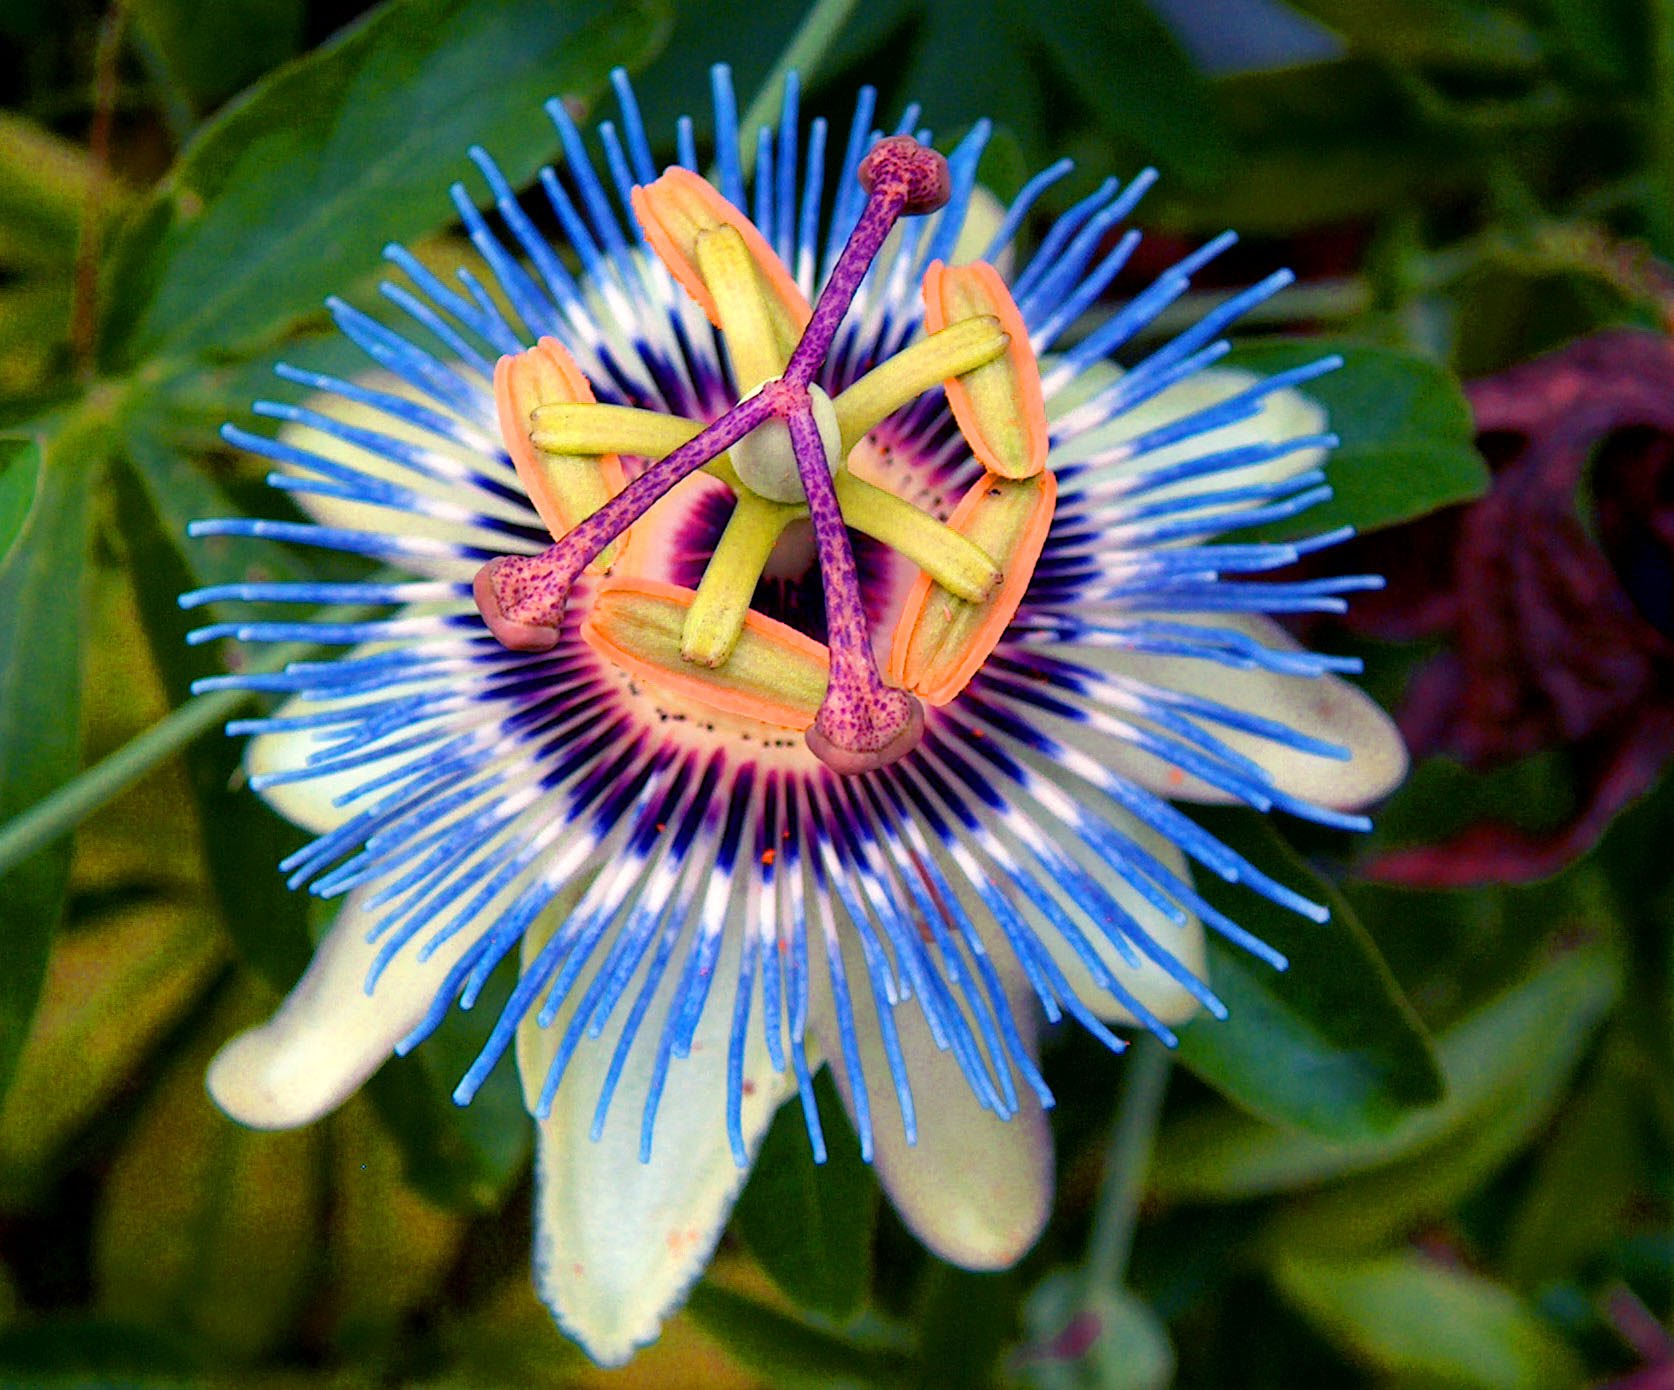 Anxious? Overthinking? Can't Sleep? Passion Flower Can Help! - YouTube